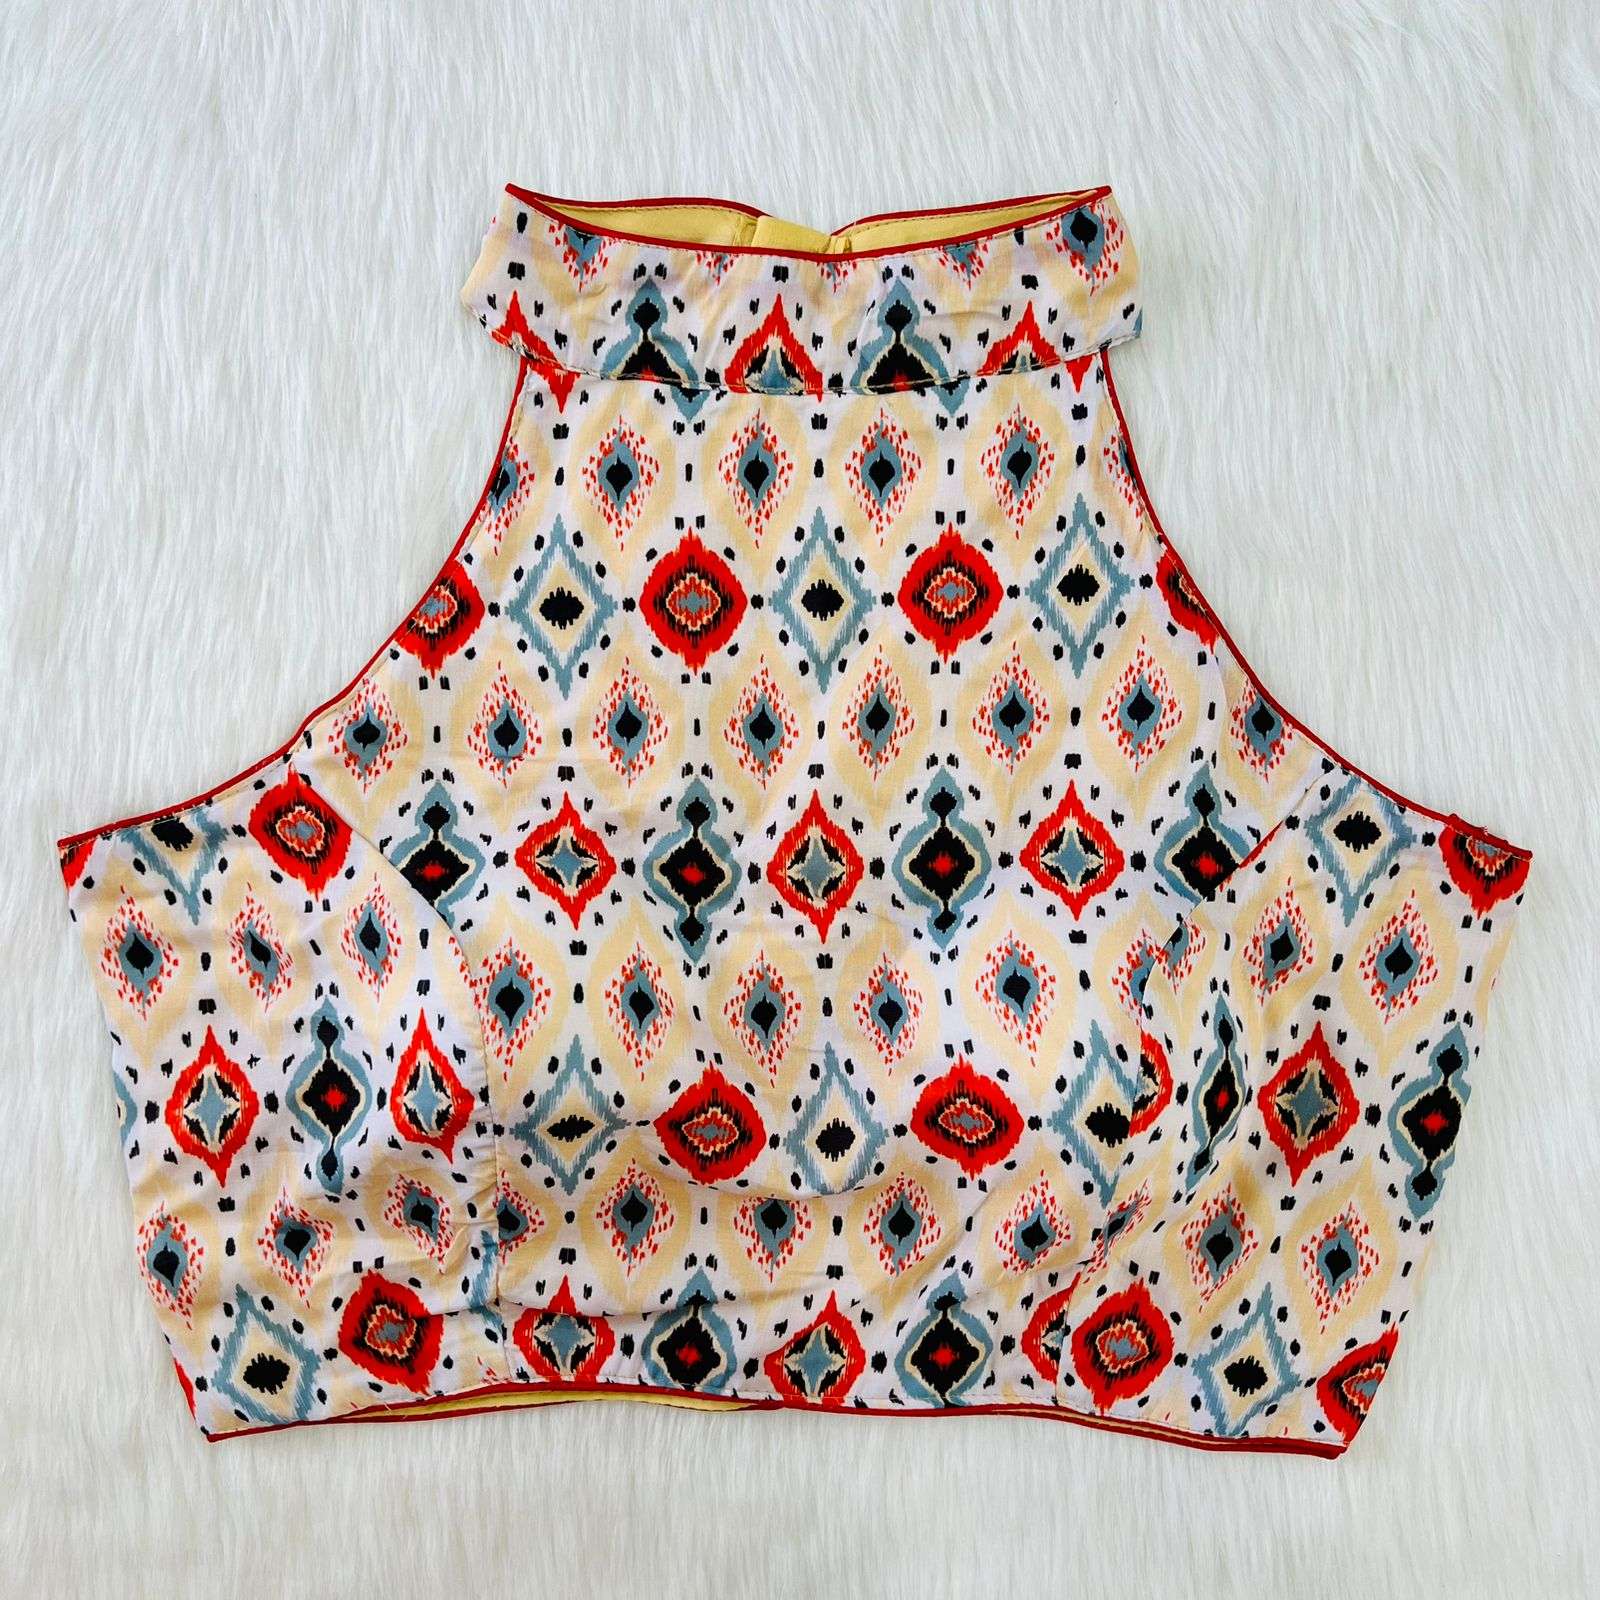 HALTER NEXT BLOUSE LATEST PRINTED READY MADE BLOUSE COLLECTI...